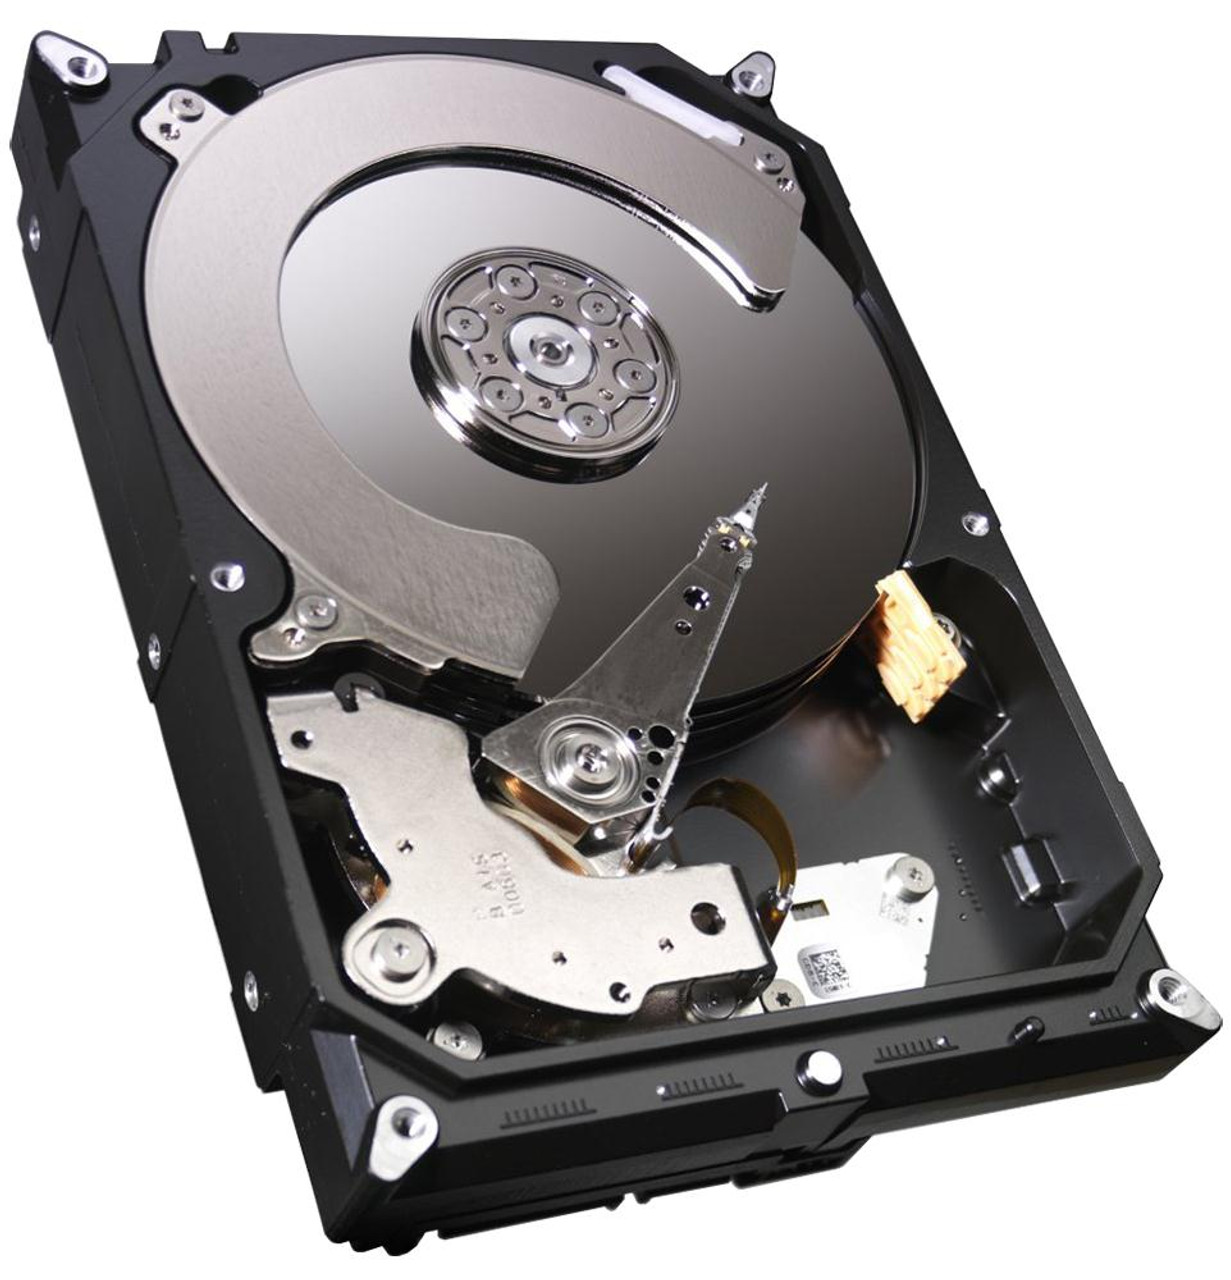 861750-B21#0D1 HPE 6TB 7200RPM SATA 6Gbps Midline (512e) 3.5-inch Internal Hard Drive with Smart Carrier